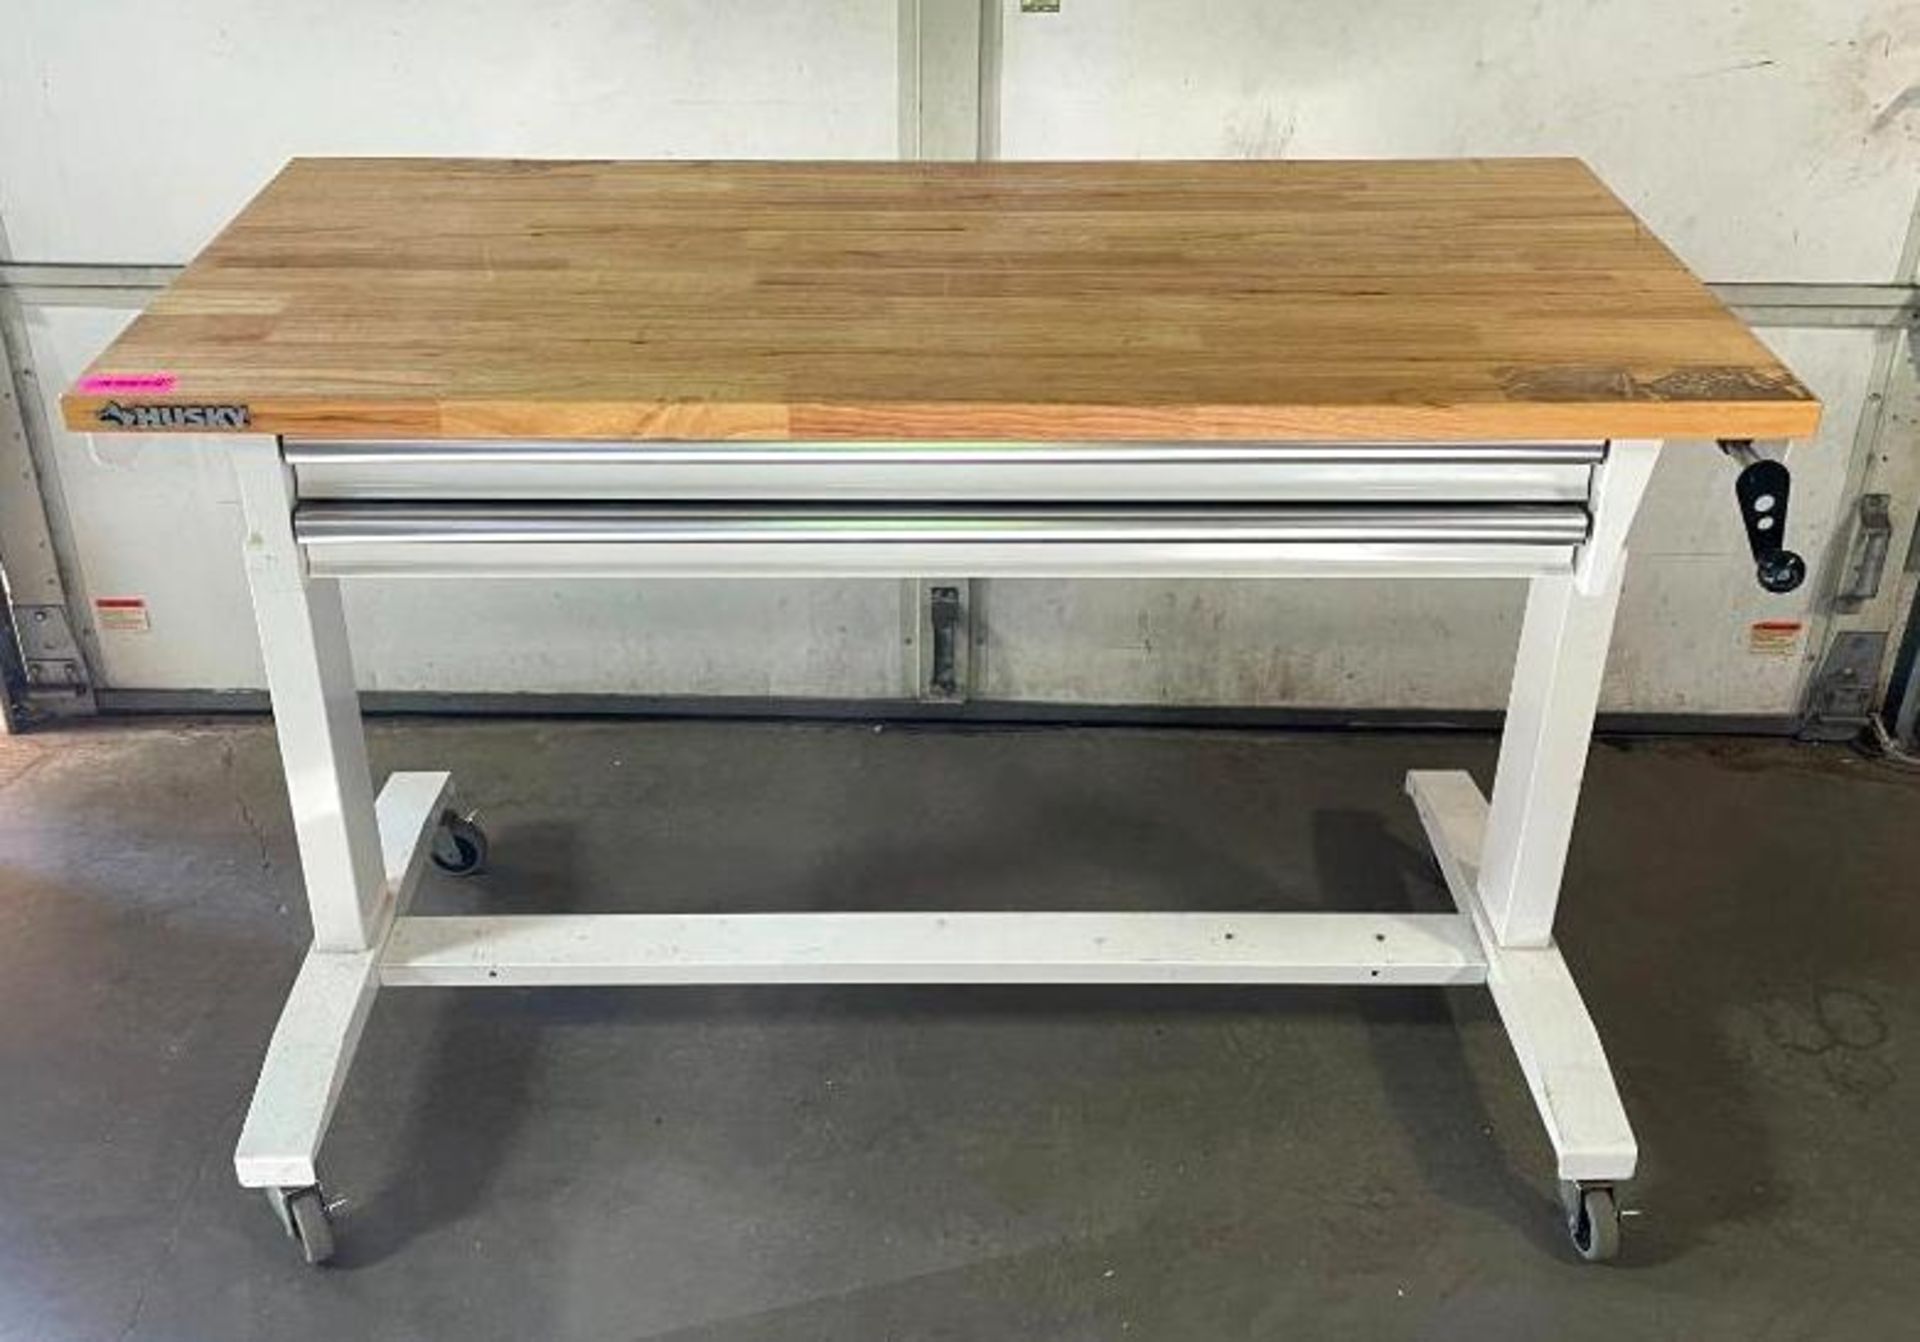 52" ADJUSTABLE HEIGHT WORKBENCH TABLE W/ 2-DRAWERS IN WHITE BRAND/MODEL: HUSKY SIZE: 52" X 24" QTY: